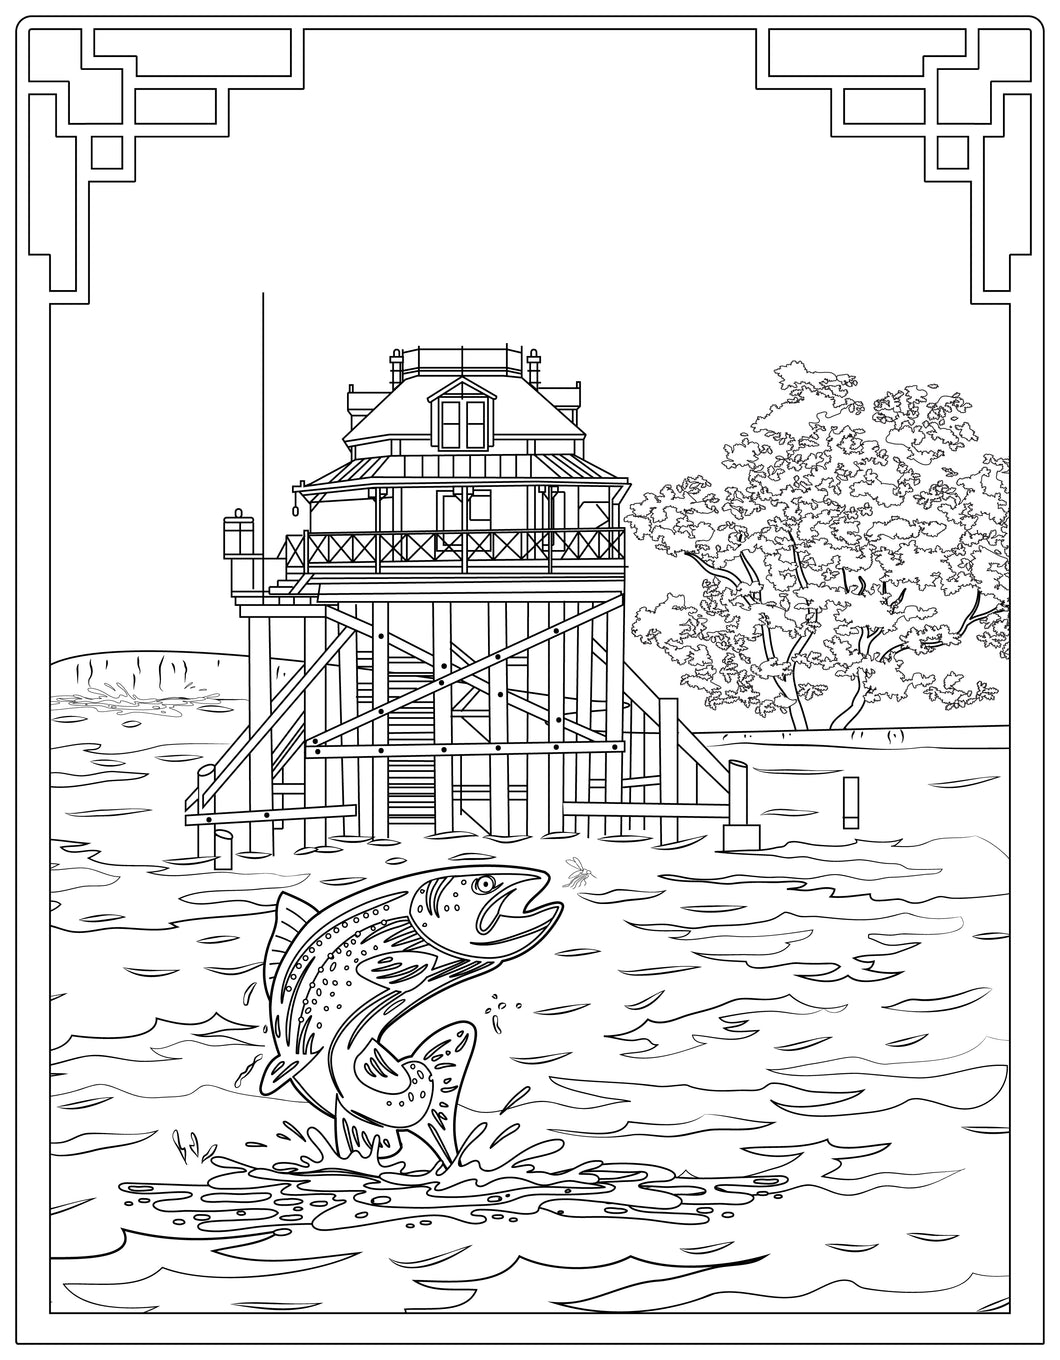 Single Coloring Book Page - Willamette River Lighthouse, Oregon - Digital Print-from-Home